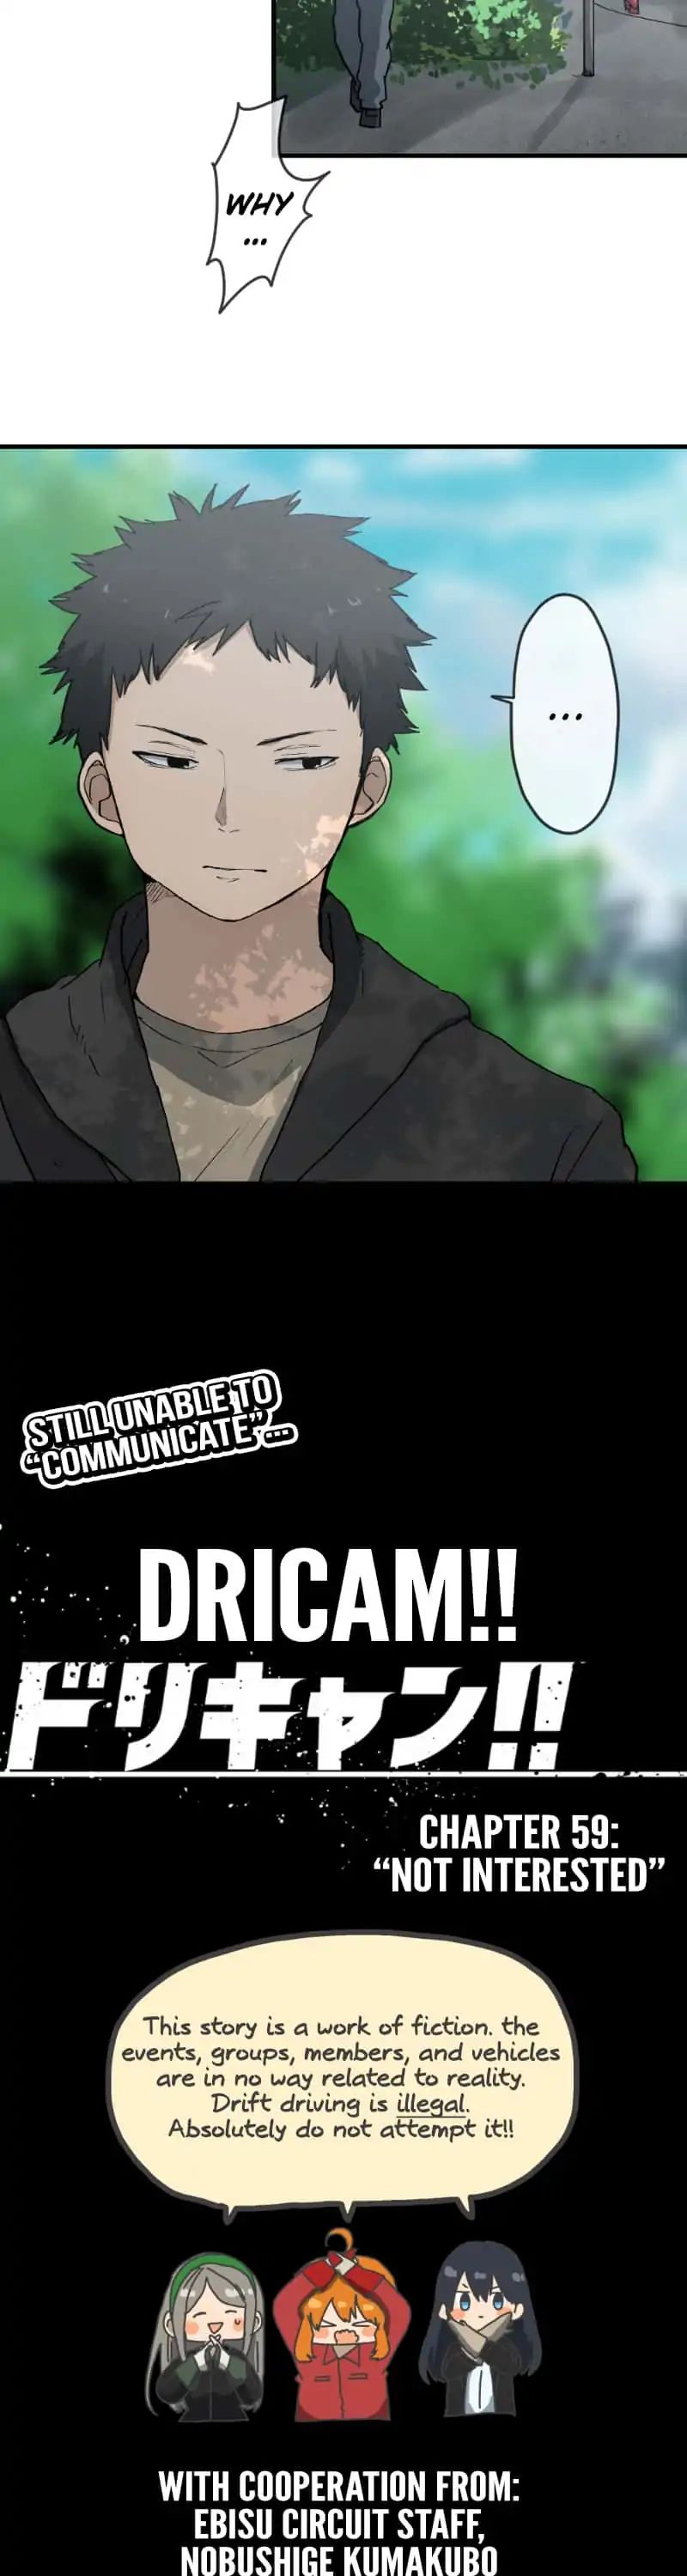 Dricam!! Chapter 59: Not Interested